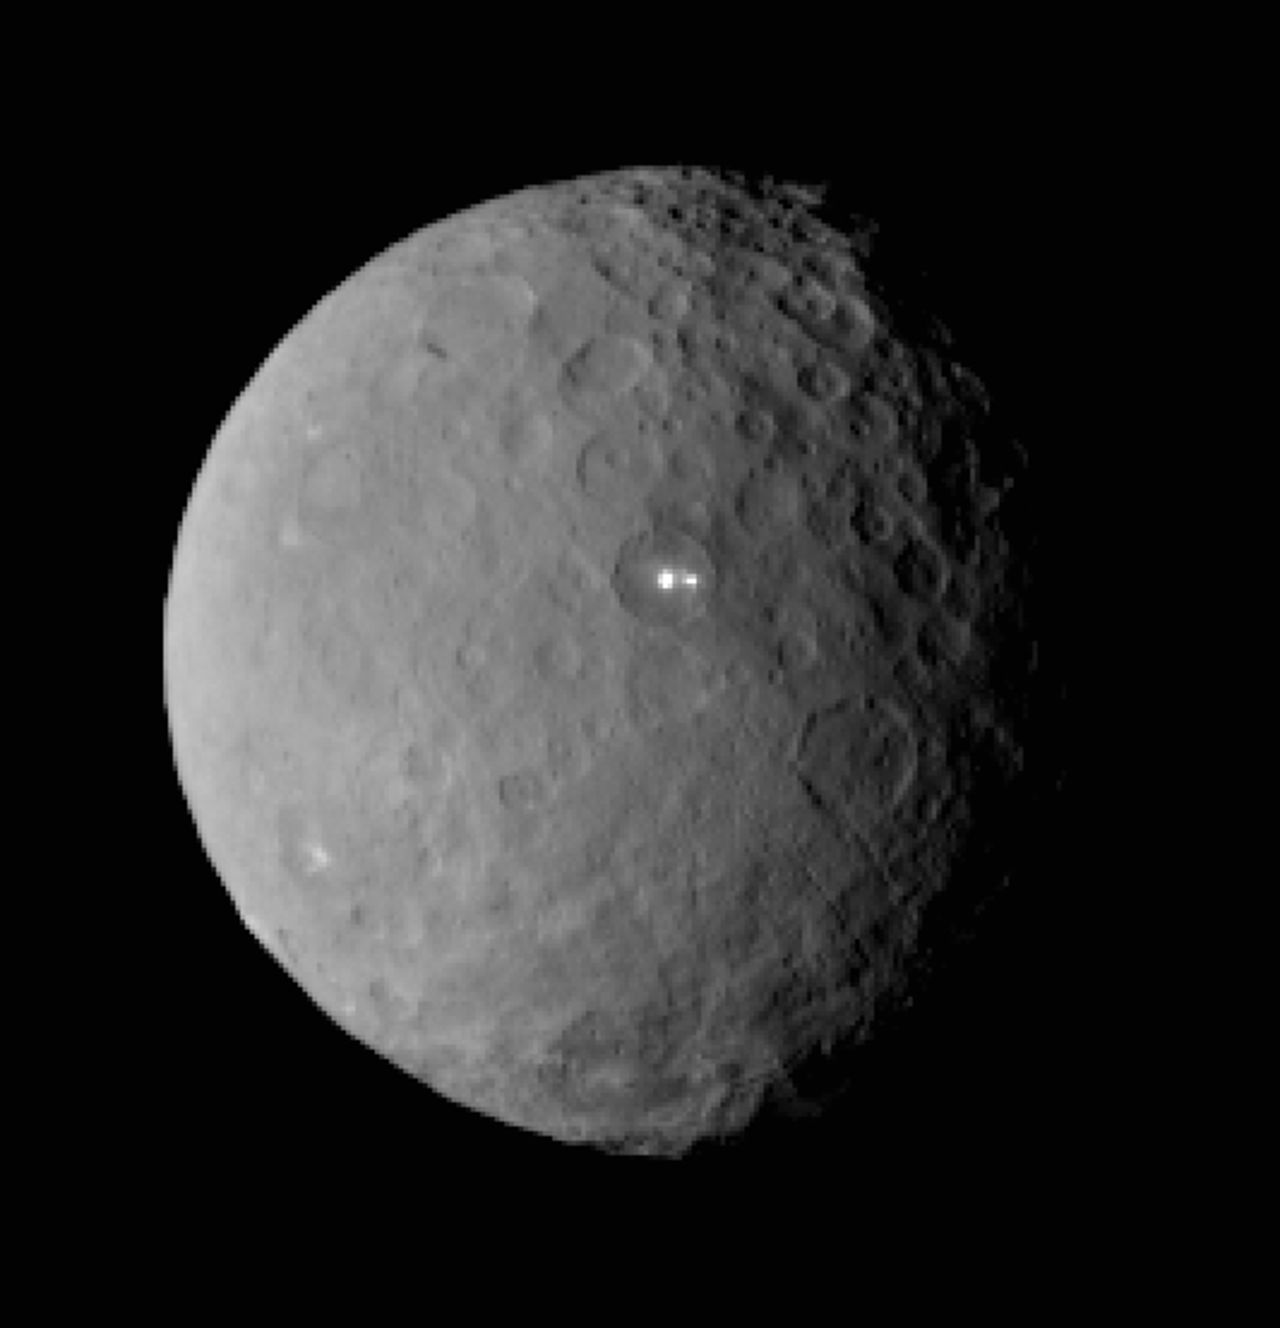 "Ceres has really surprised us," said Carol Raymond, Dawn's deputy principal investigator. "The first images have produced some really puzzling features." One of the puzzles: two bright white spots that showed up in photographs taken by Dawn on February 19.